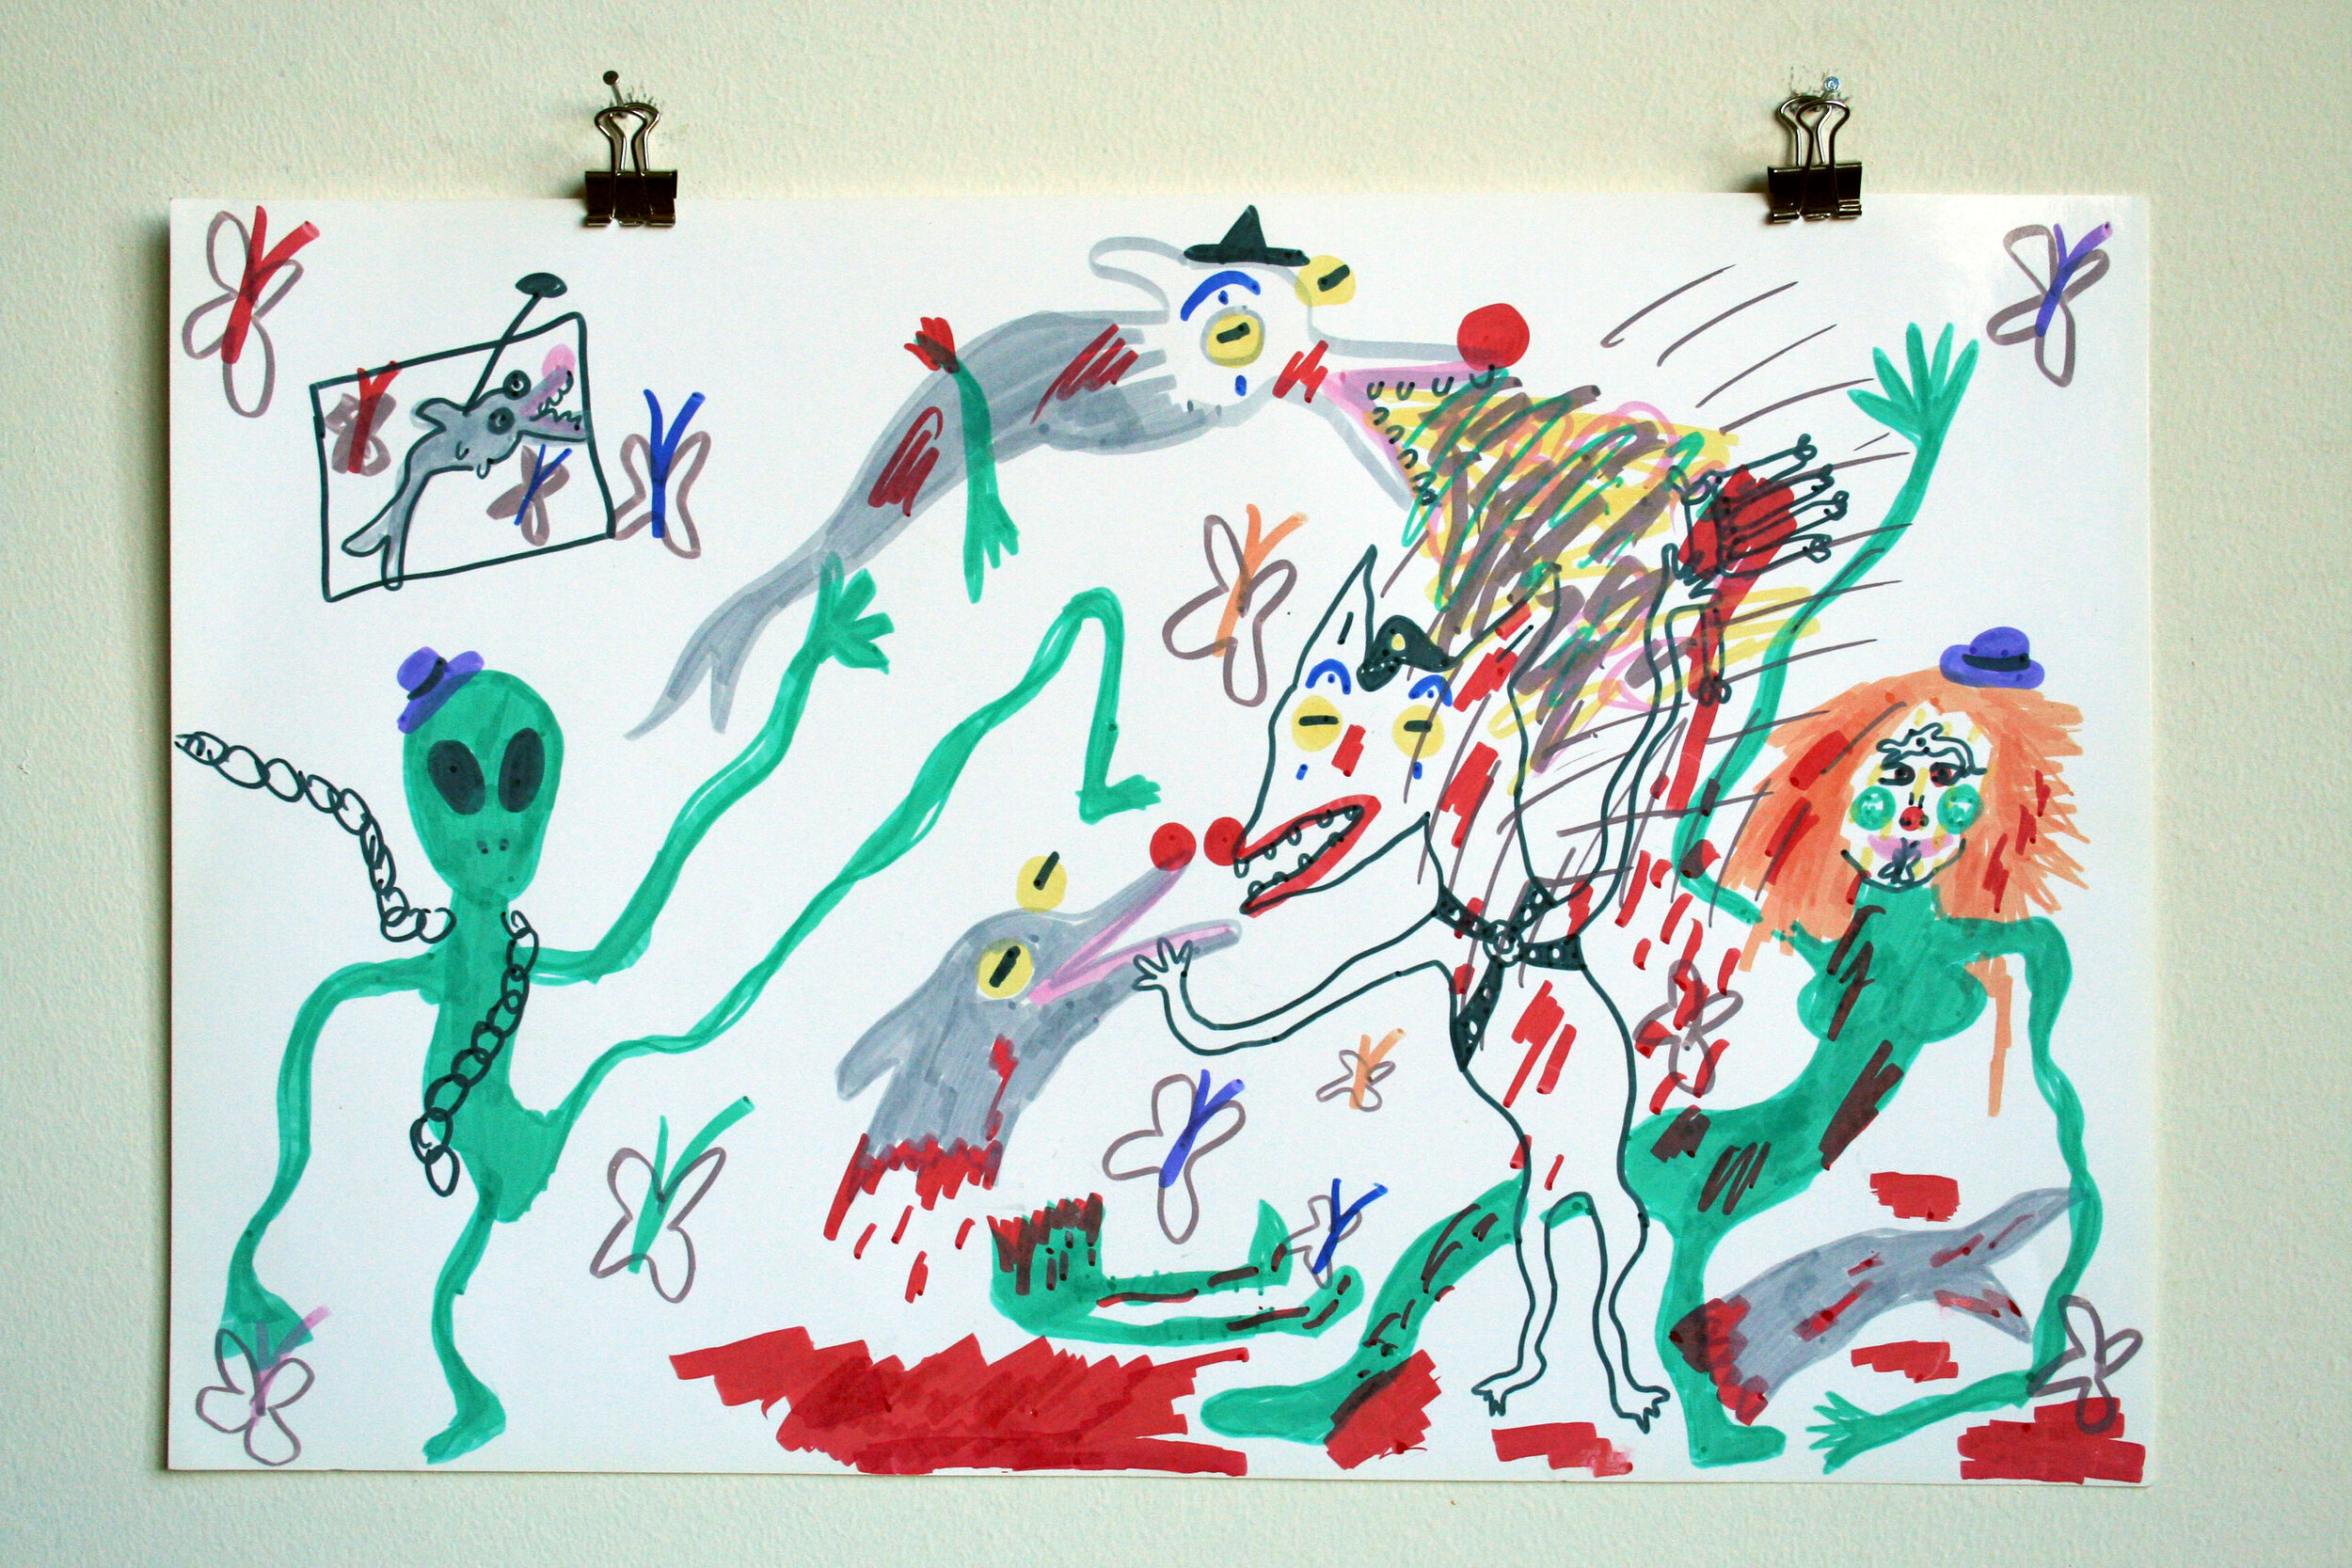   Old Put The Artist,   2015  12 x 18 inches (30.48 x 45.72 cm.)  Marker on paper 